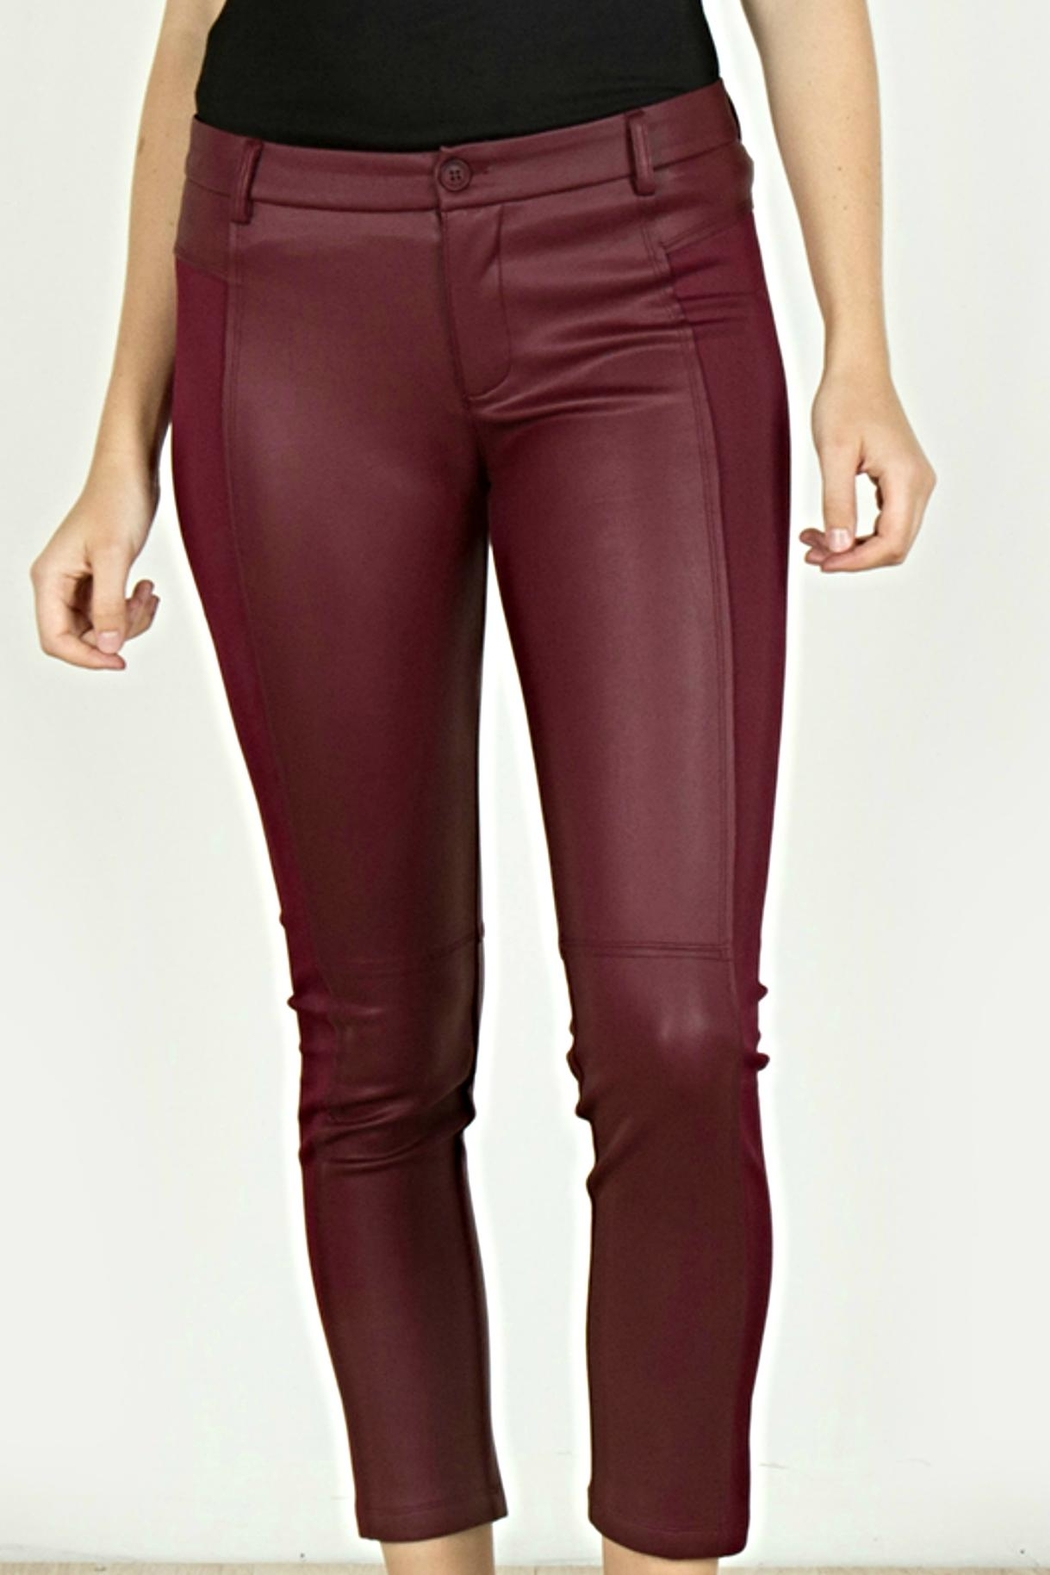 Women's Maroon Leather Pant - Maker of Jacket